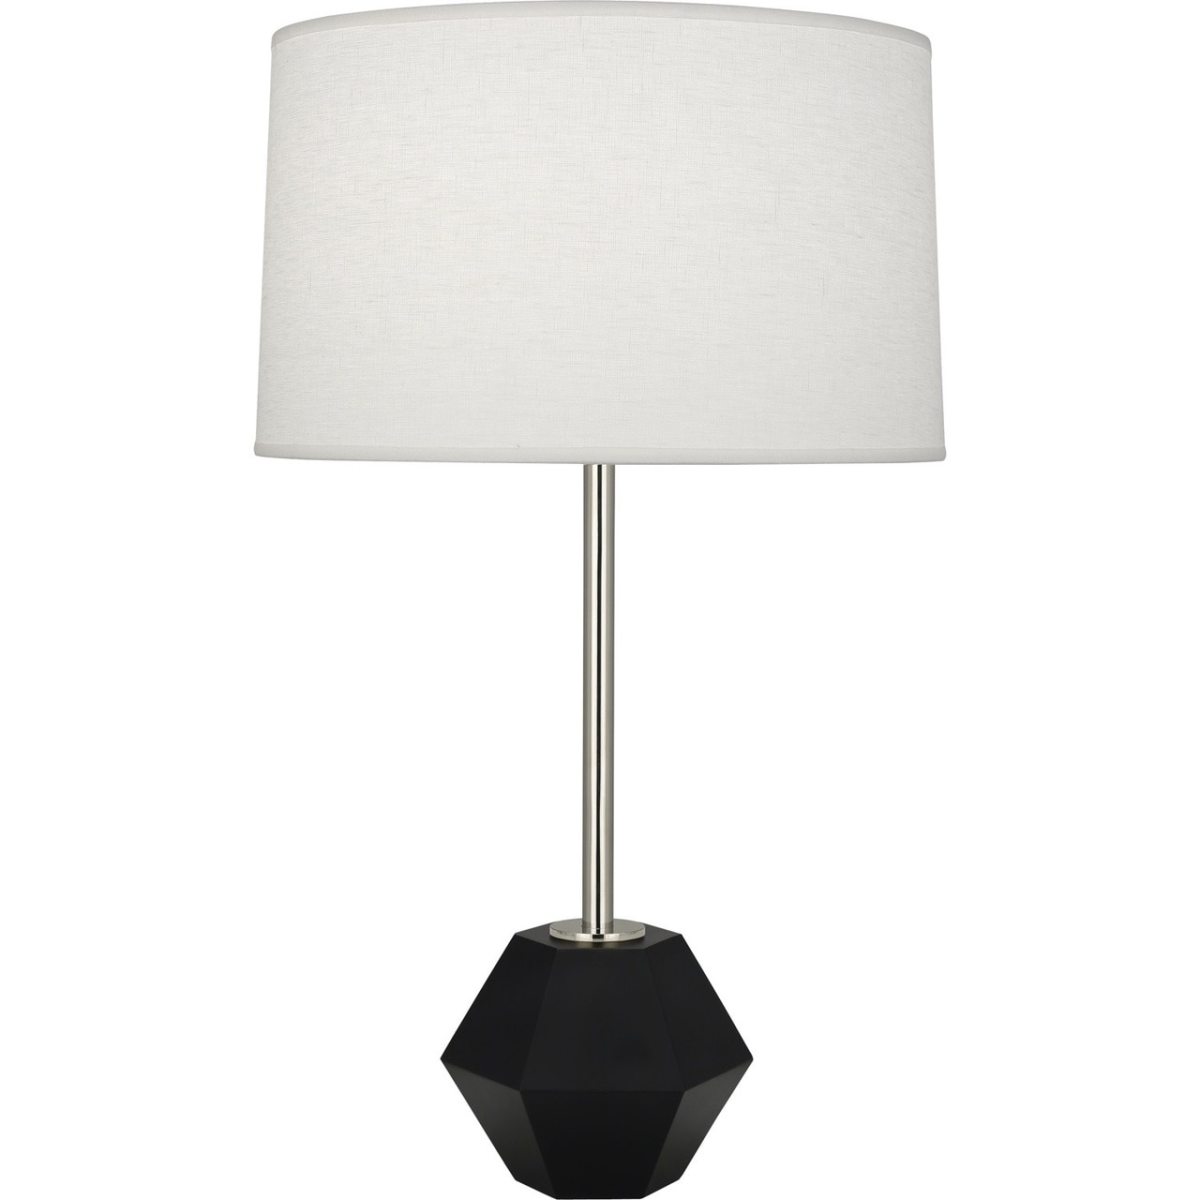 201 Marcel Table Lamp, Polished Nickel with Matte Black Faceted Base - 27.38 x 7.38 in -  Robert Abbey